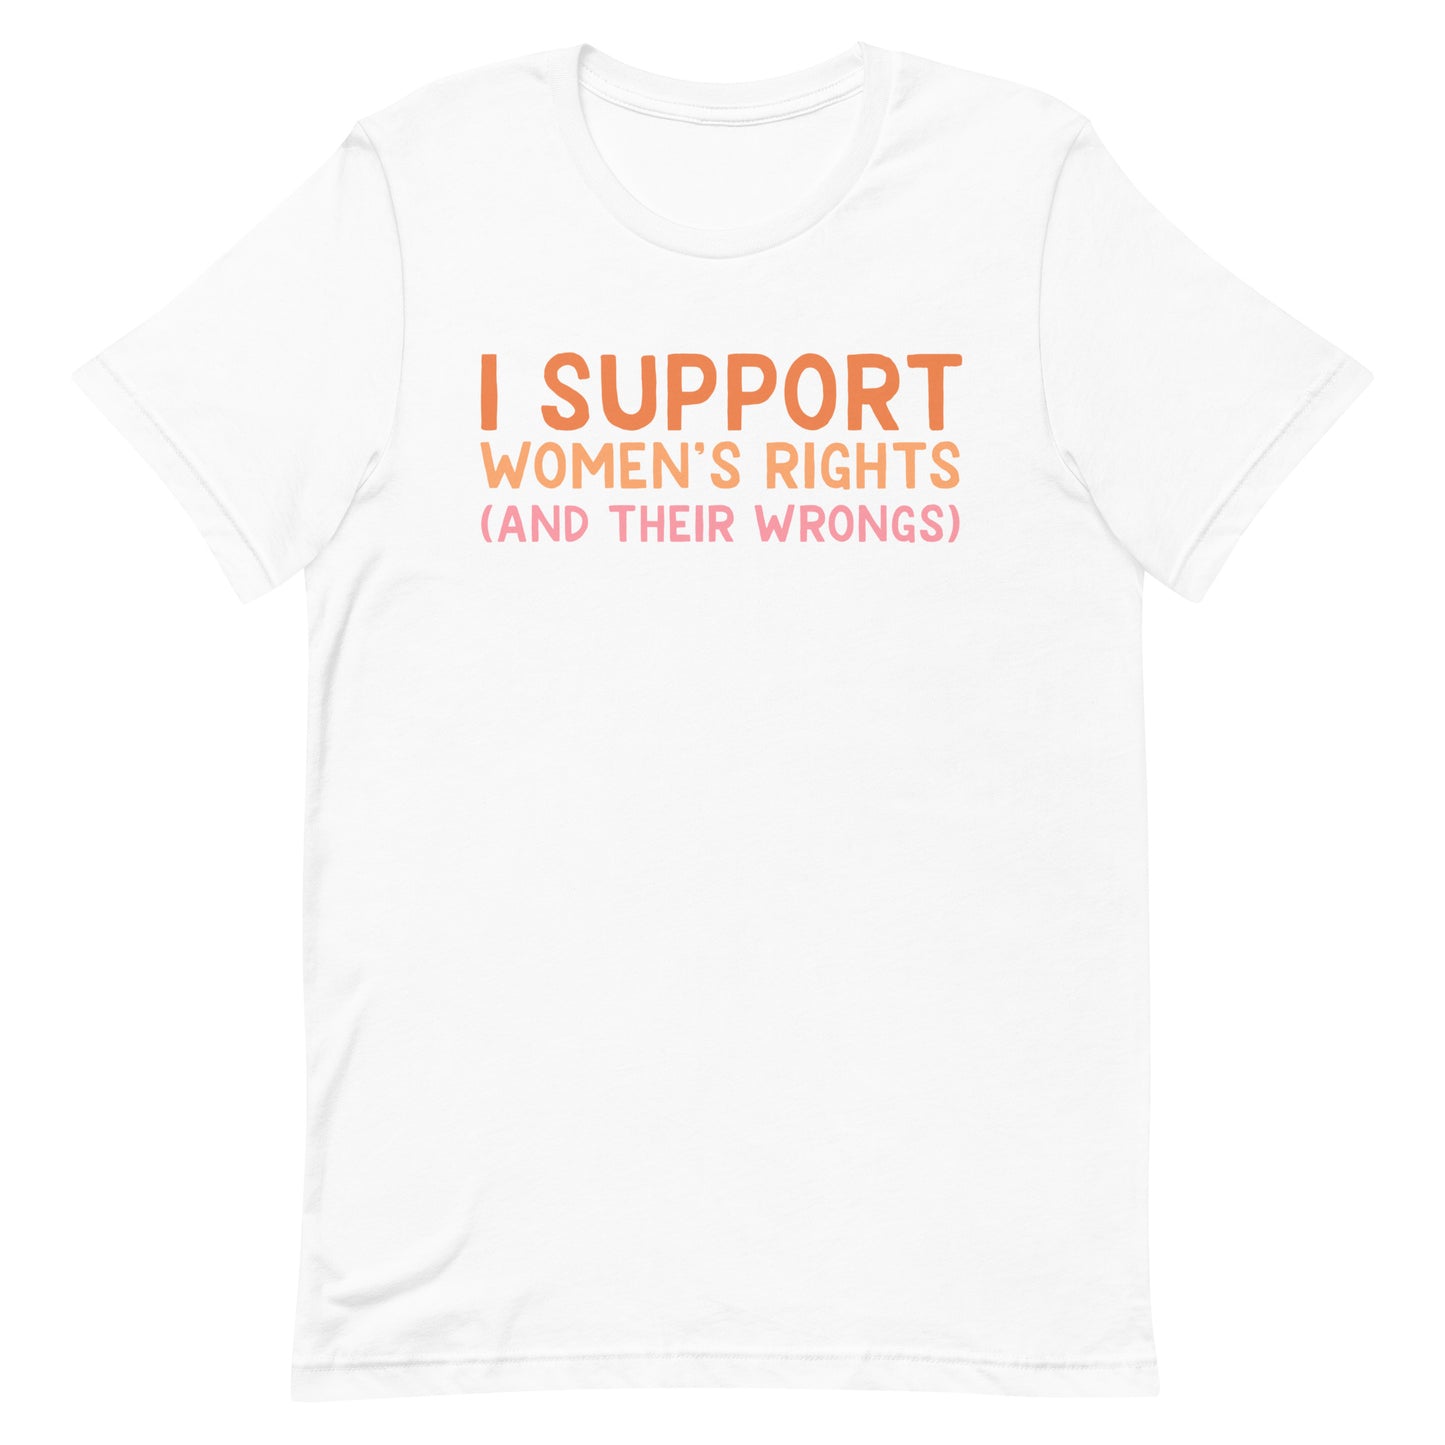 I Support Women's Rights (and Wrongs) Unisex t-shirt V1